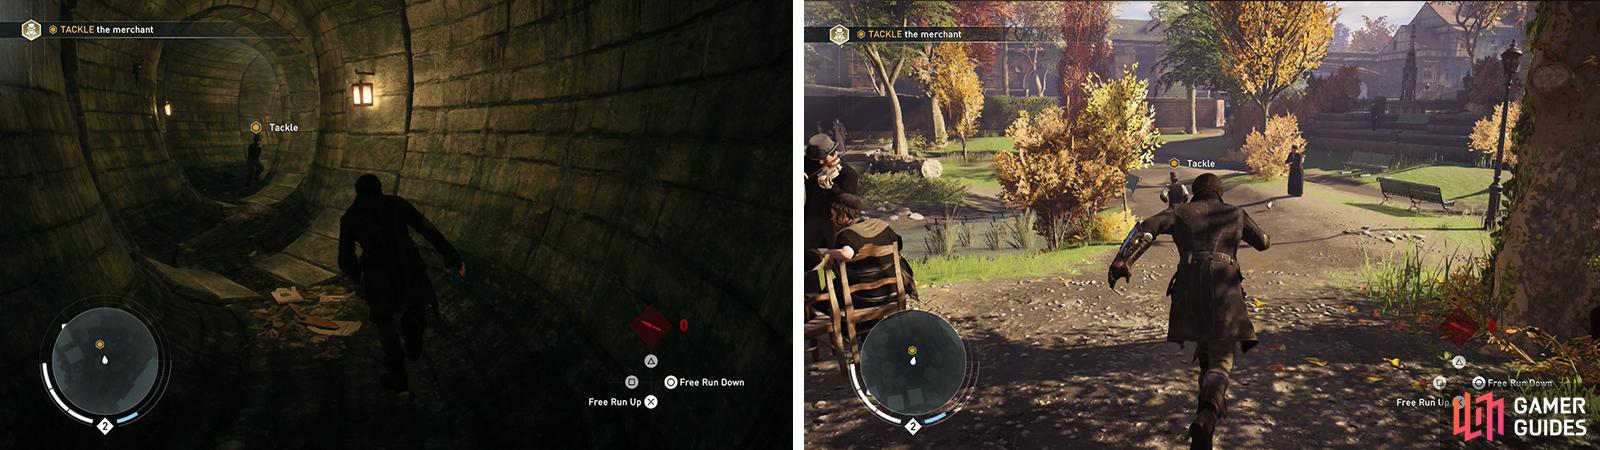 Chase the target through the sewer (left) and tackle him when you catch him in the park (right).